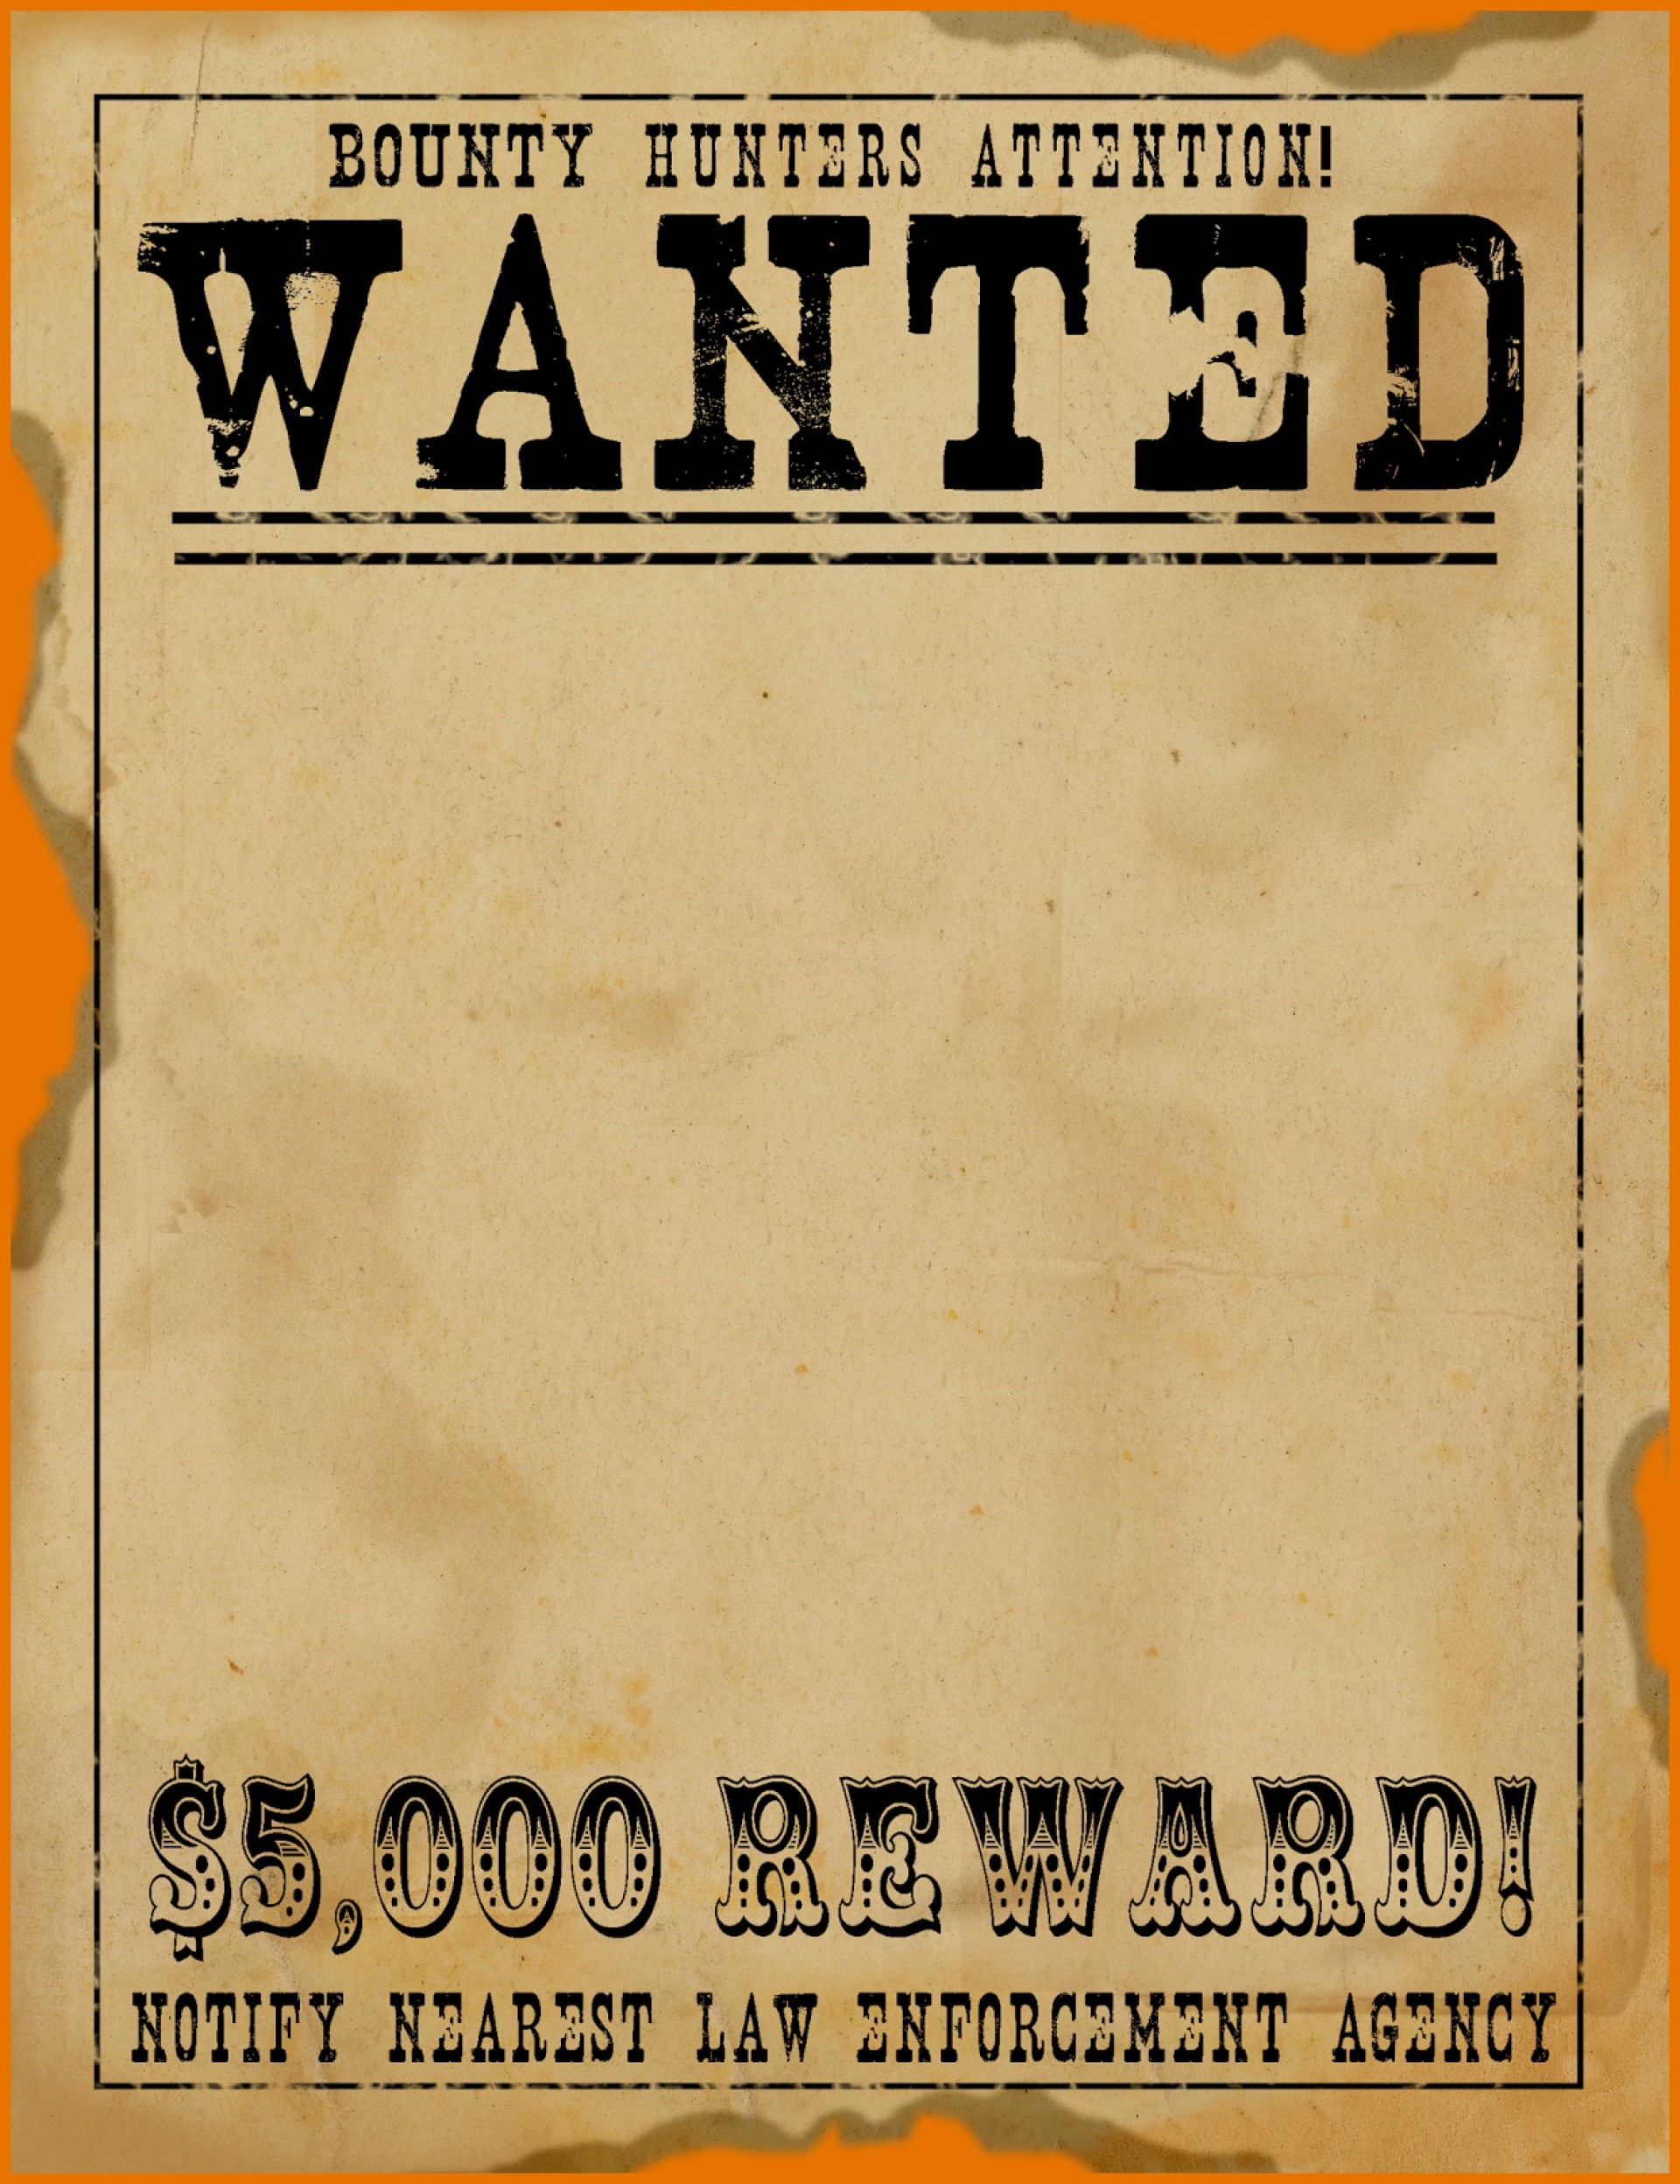 Wanted Reward Template - Tutlin.psstech.co - Wanted Poster ...
 Example Of A Wanted Poster